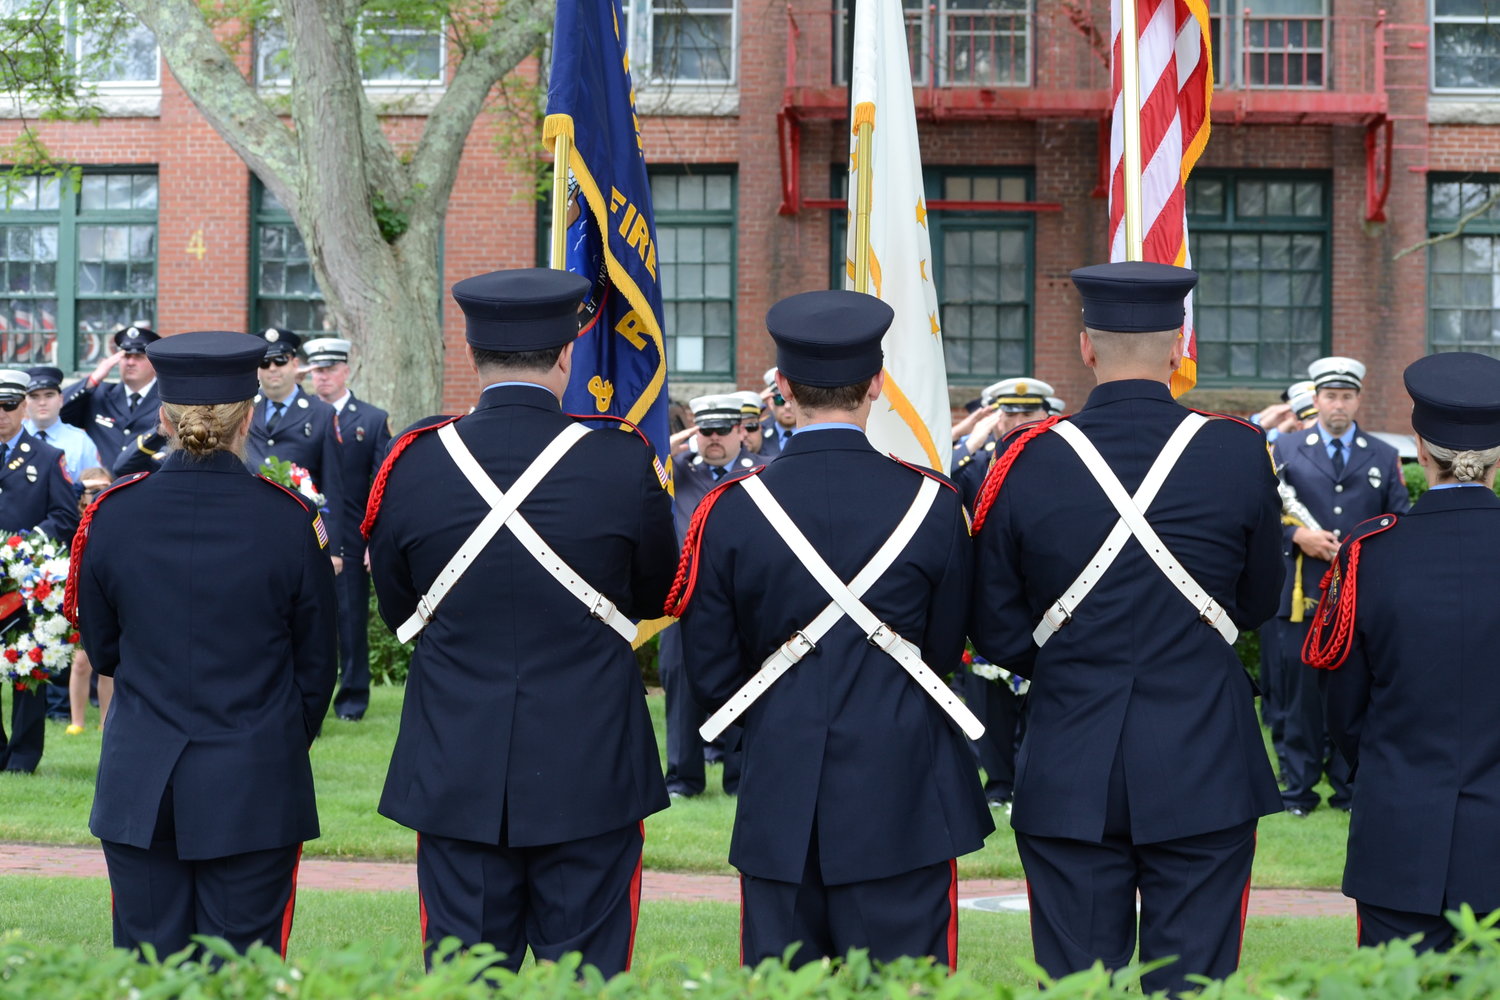 Firefighters salute the flag during the National Anthem prior to the commemoration ceremony at Firemen’s Memorial Park on Sunday.